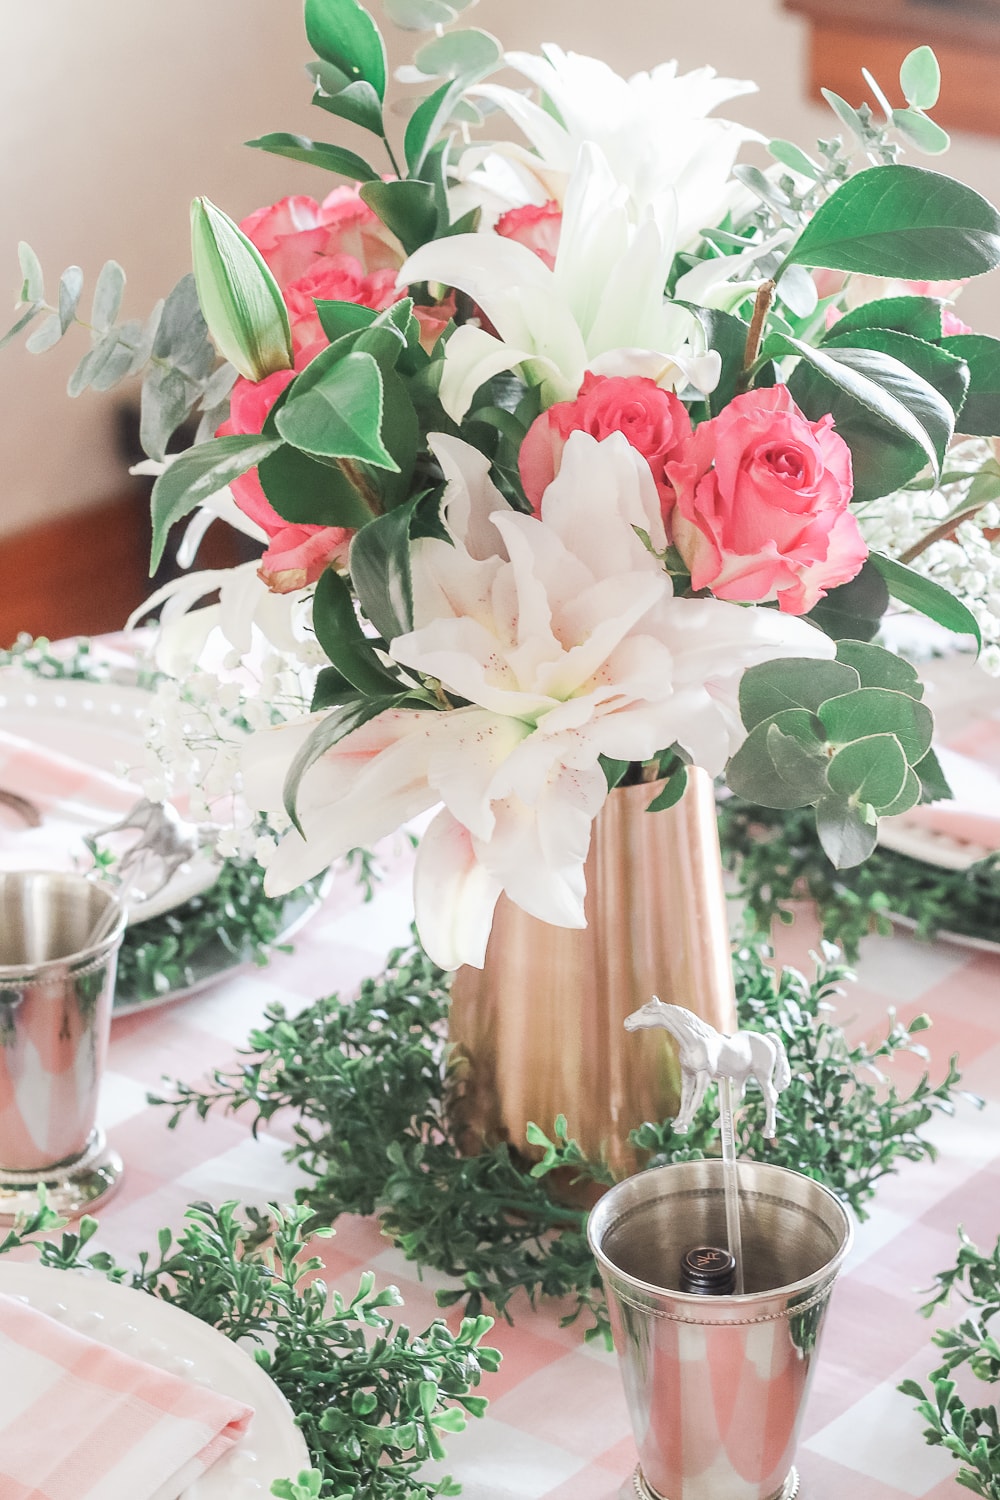 Derby Day centerpiece made with pink roses, white rose lilies, and greenery and designed by entertaining blogger Stephanie Ziajka on Diary of a Debutante